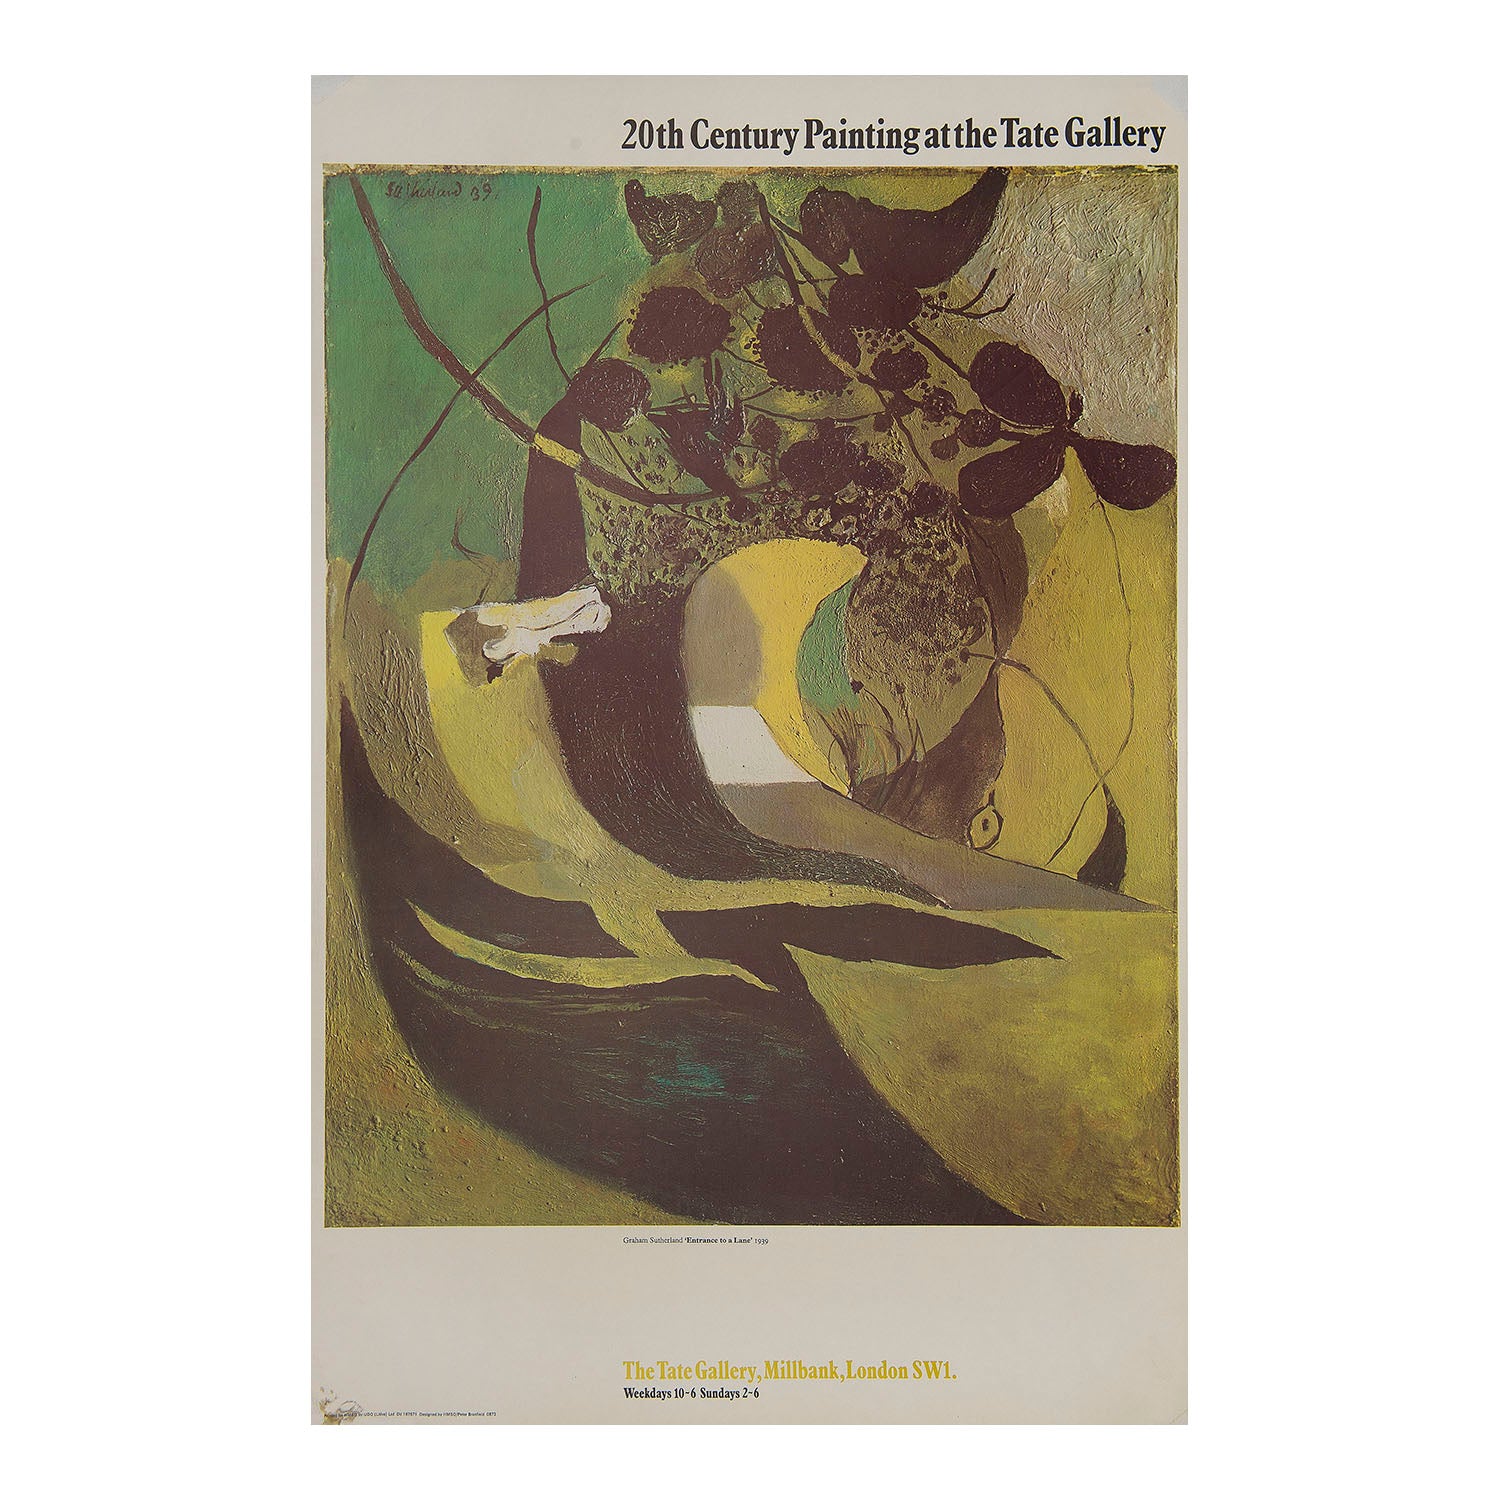 Original gallery poster: 20th Century Painting at the Tate Gallery, 1973. The design features abstract artwork with a minimal colour palette - Graham Sutherland’s Entrance to a Lane, 1939.